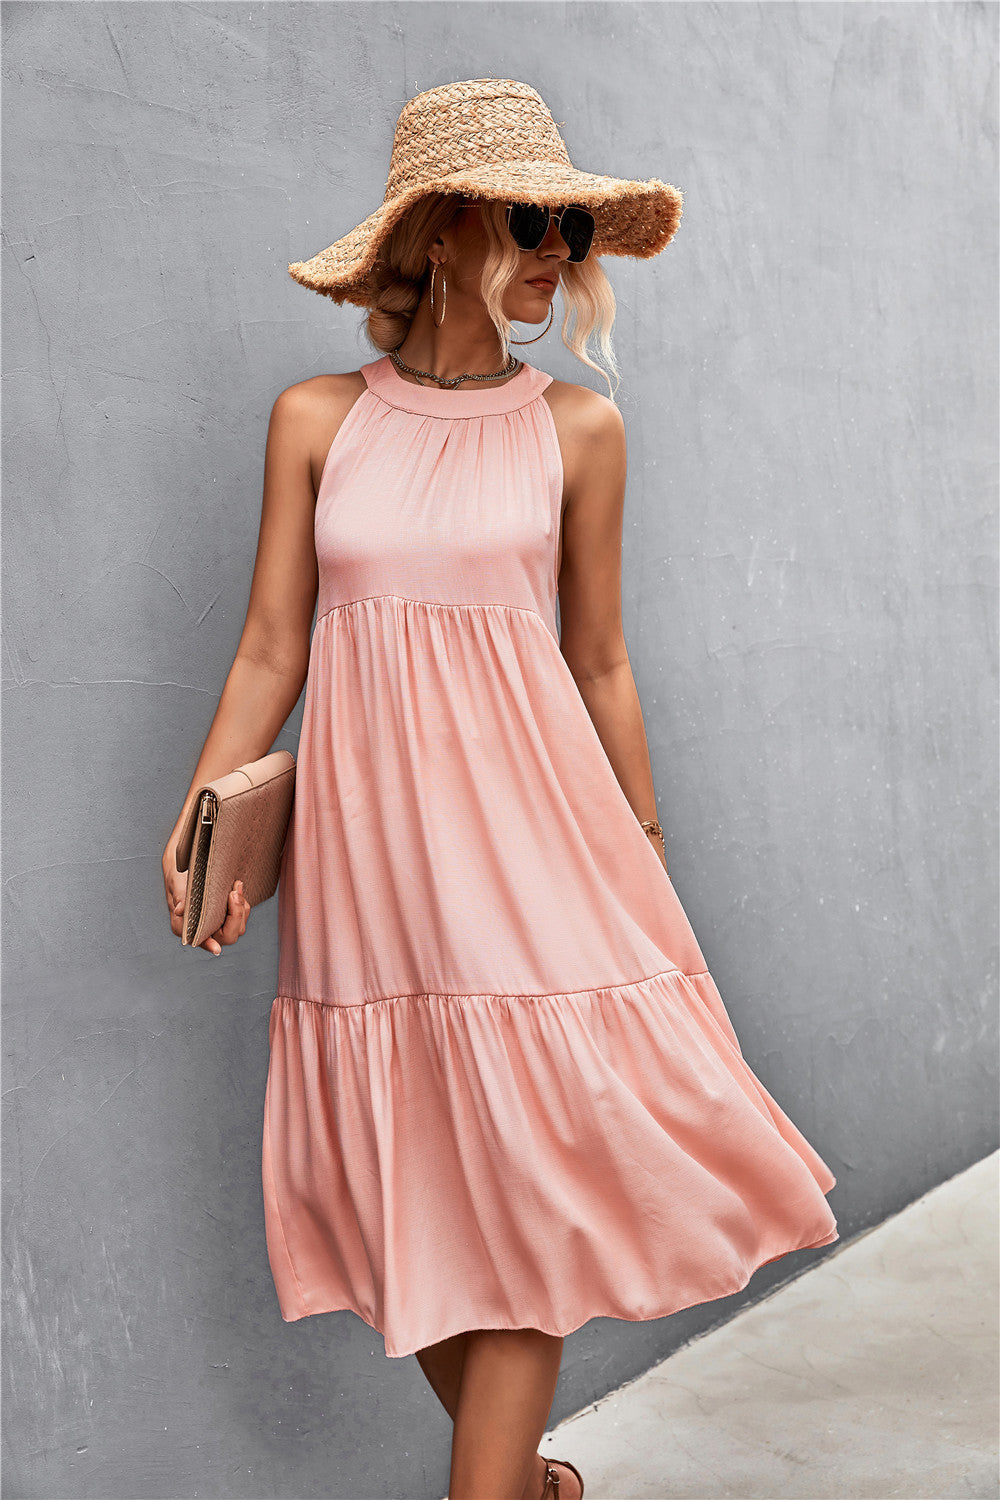 Women's Loose Splicing Casual Halter Stitching Dress